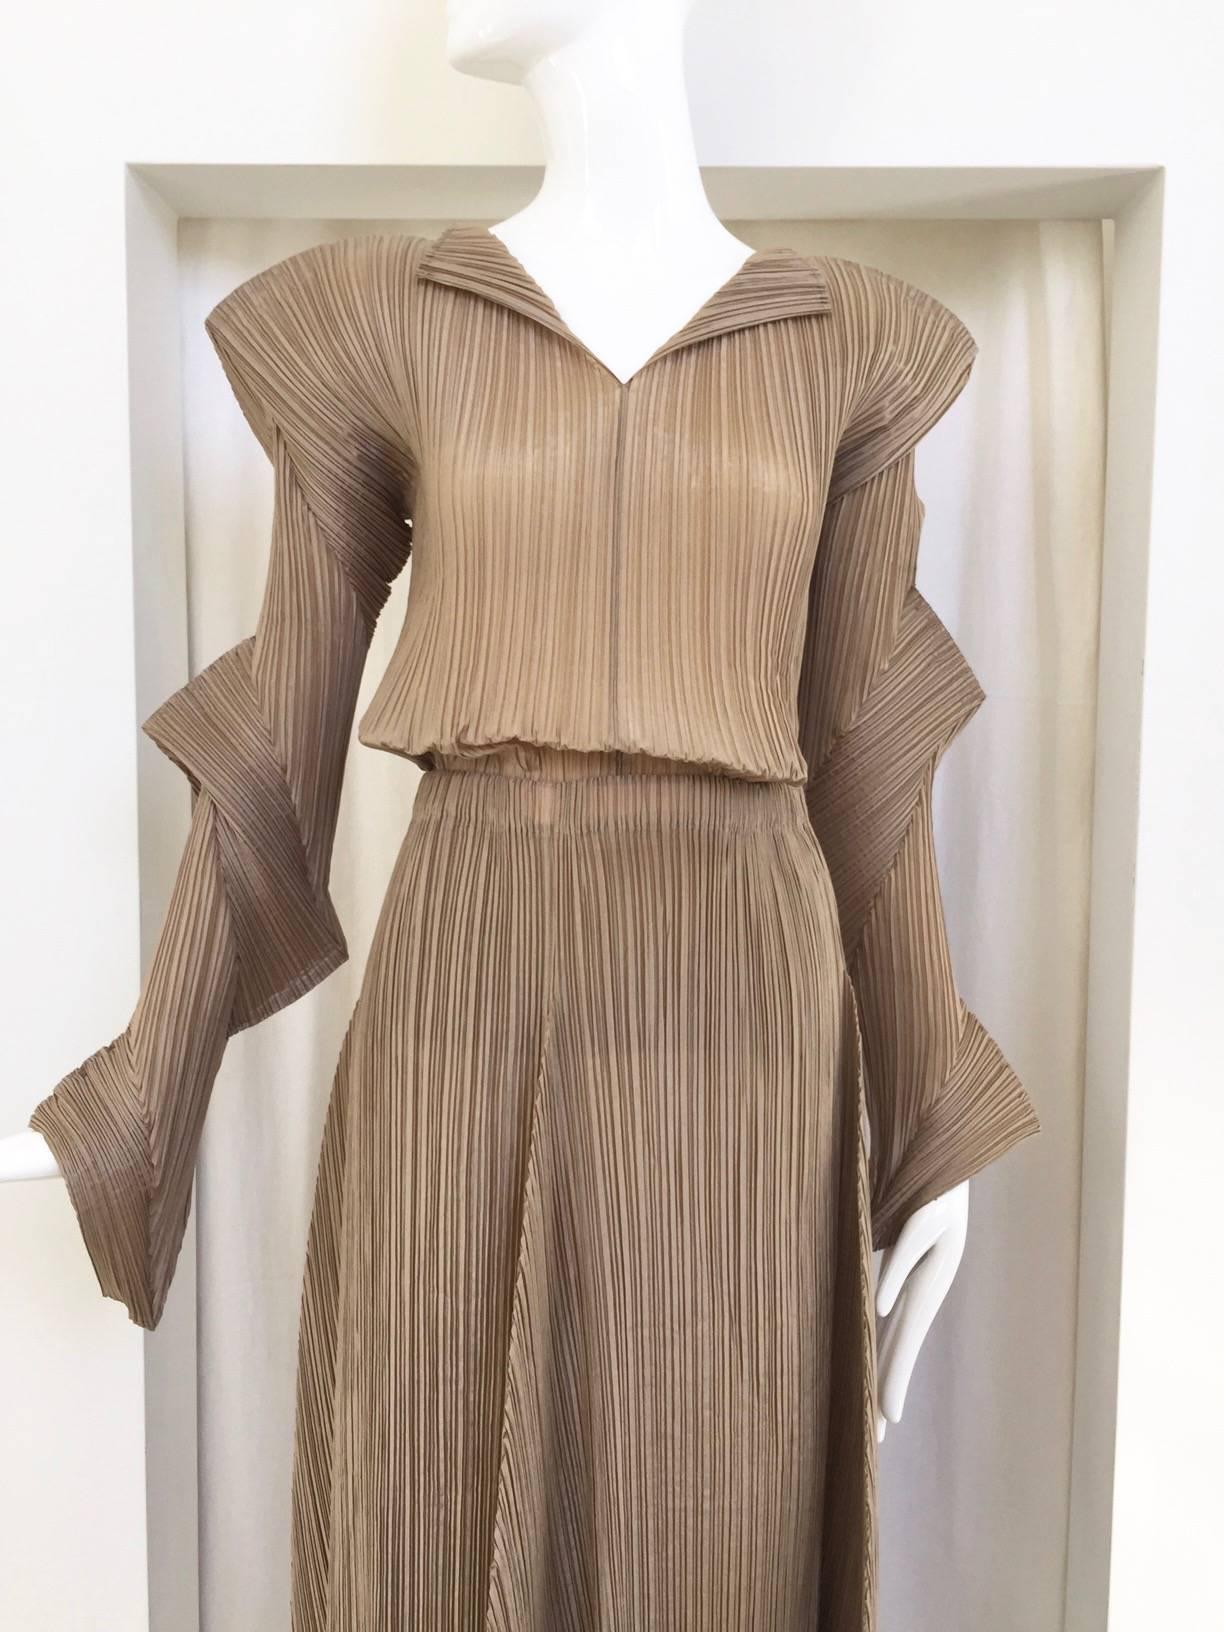 90s Issey Miyake mocha  blouse and skirt set.
Fit size 2/4/6/8
